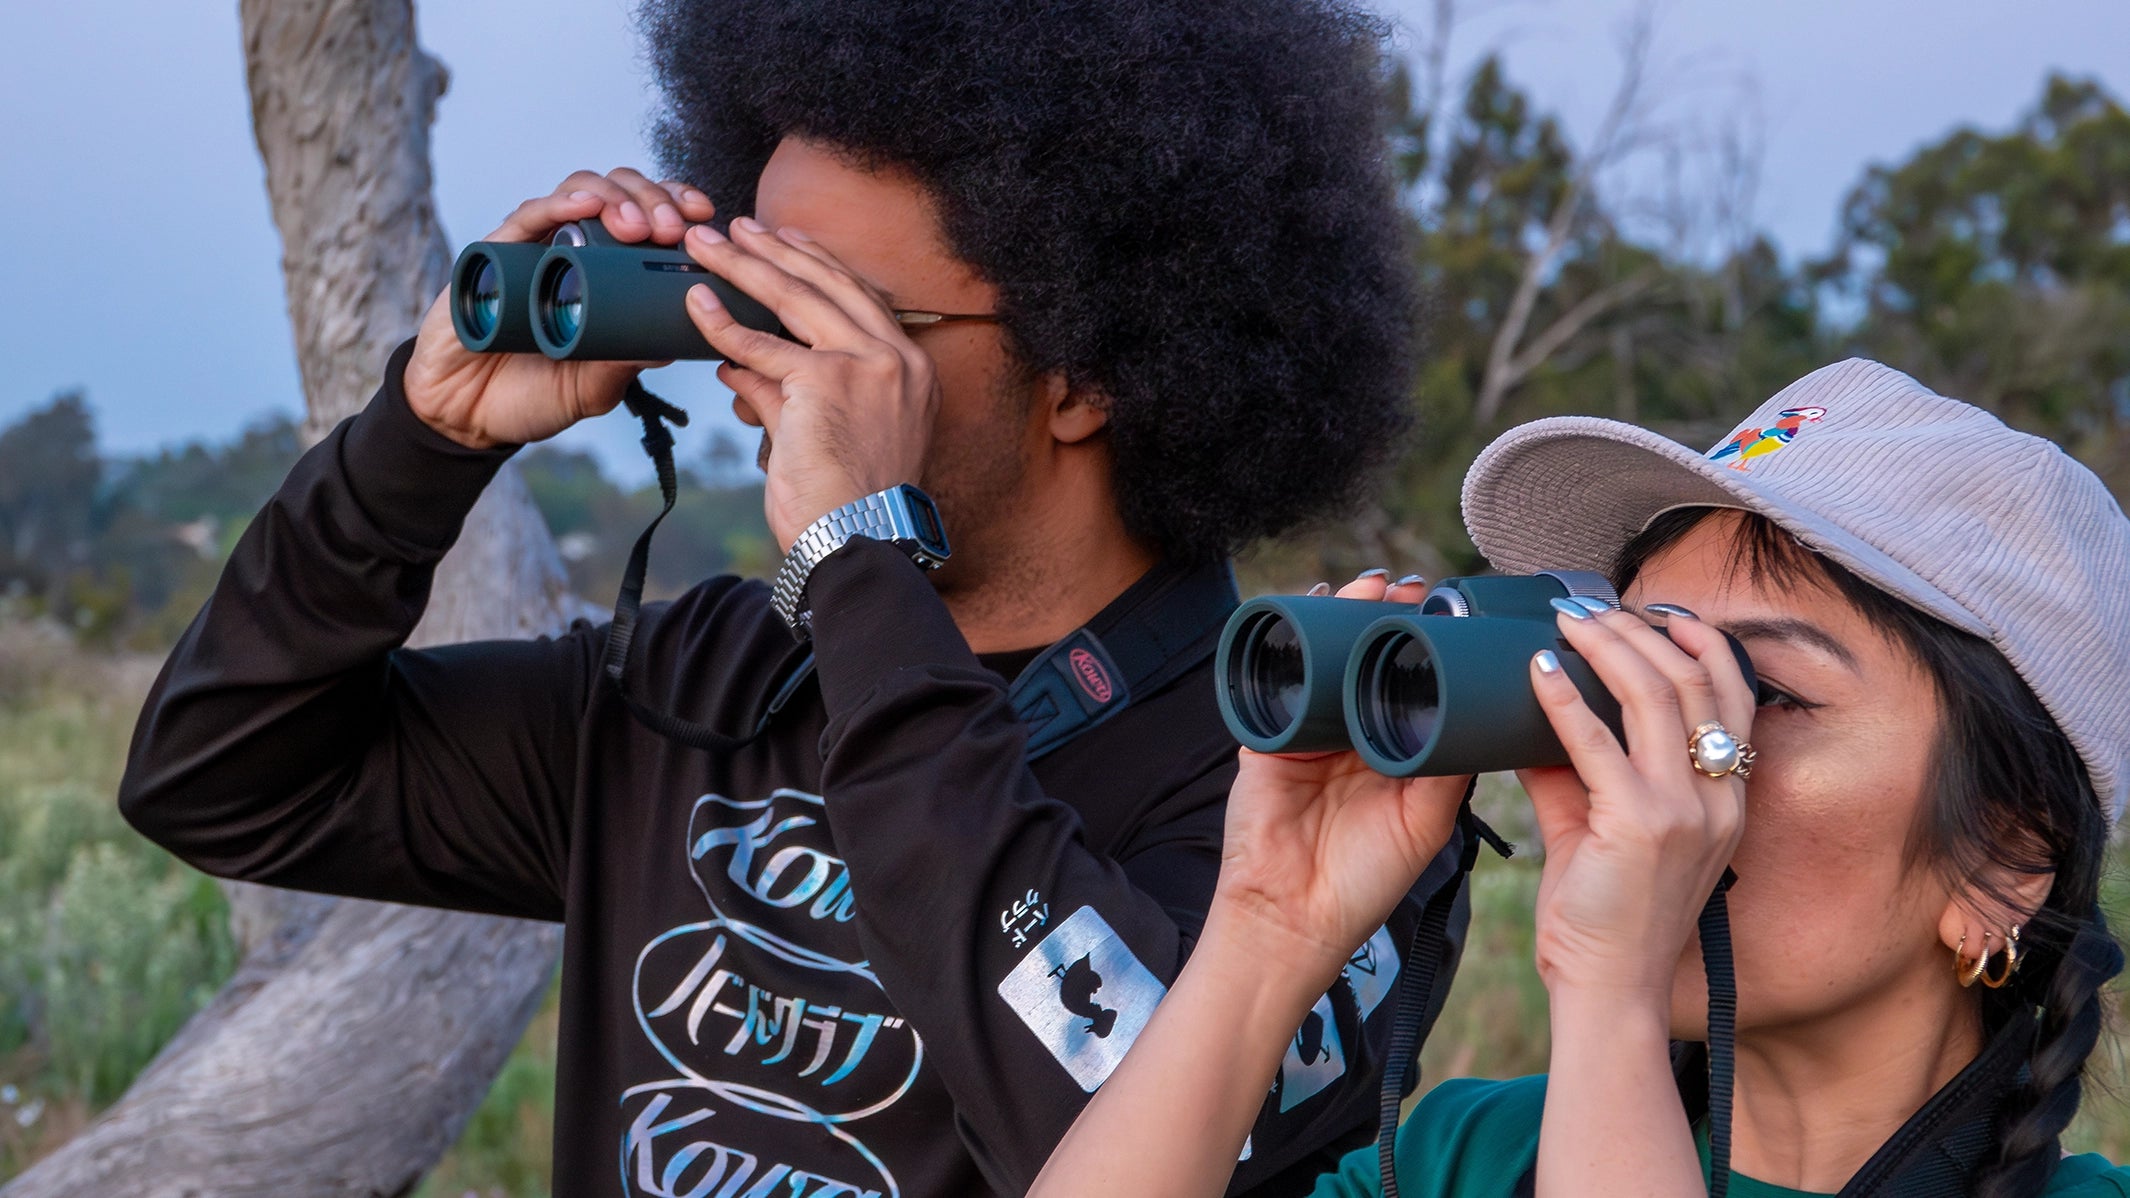 Two naturalists using Kowa binoculars for bird watching. The man wears a black BIRD CLUB shirt and the woman sports a cap with the BIRD CLUB Mandarin Duck Logo, both deeply engaged in ornithology. This image highlights the birding activity promoted by the BIRD CLUB, emphasizing the sustainable brand's dedication to high-quality, eco-friendly products.